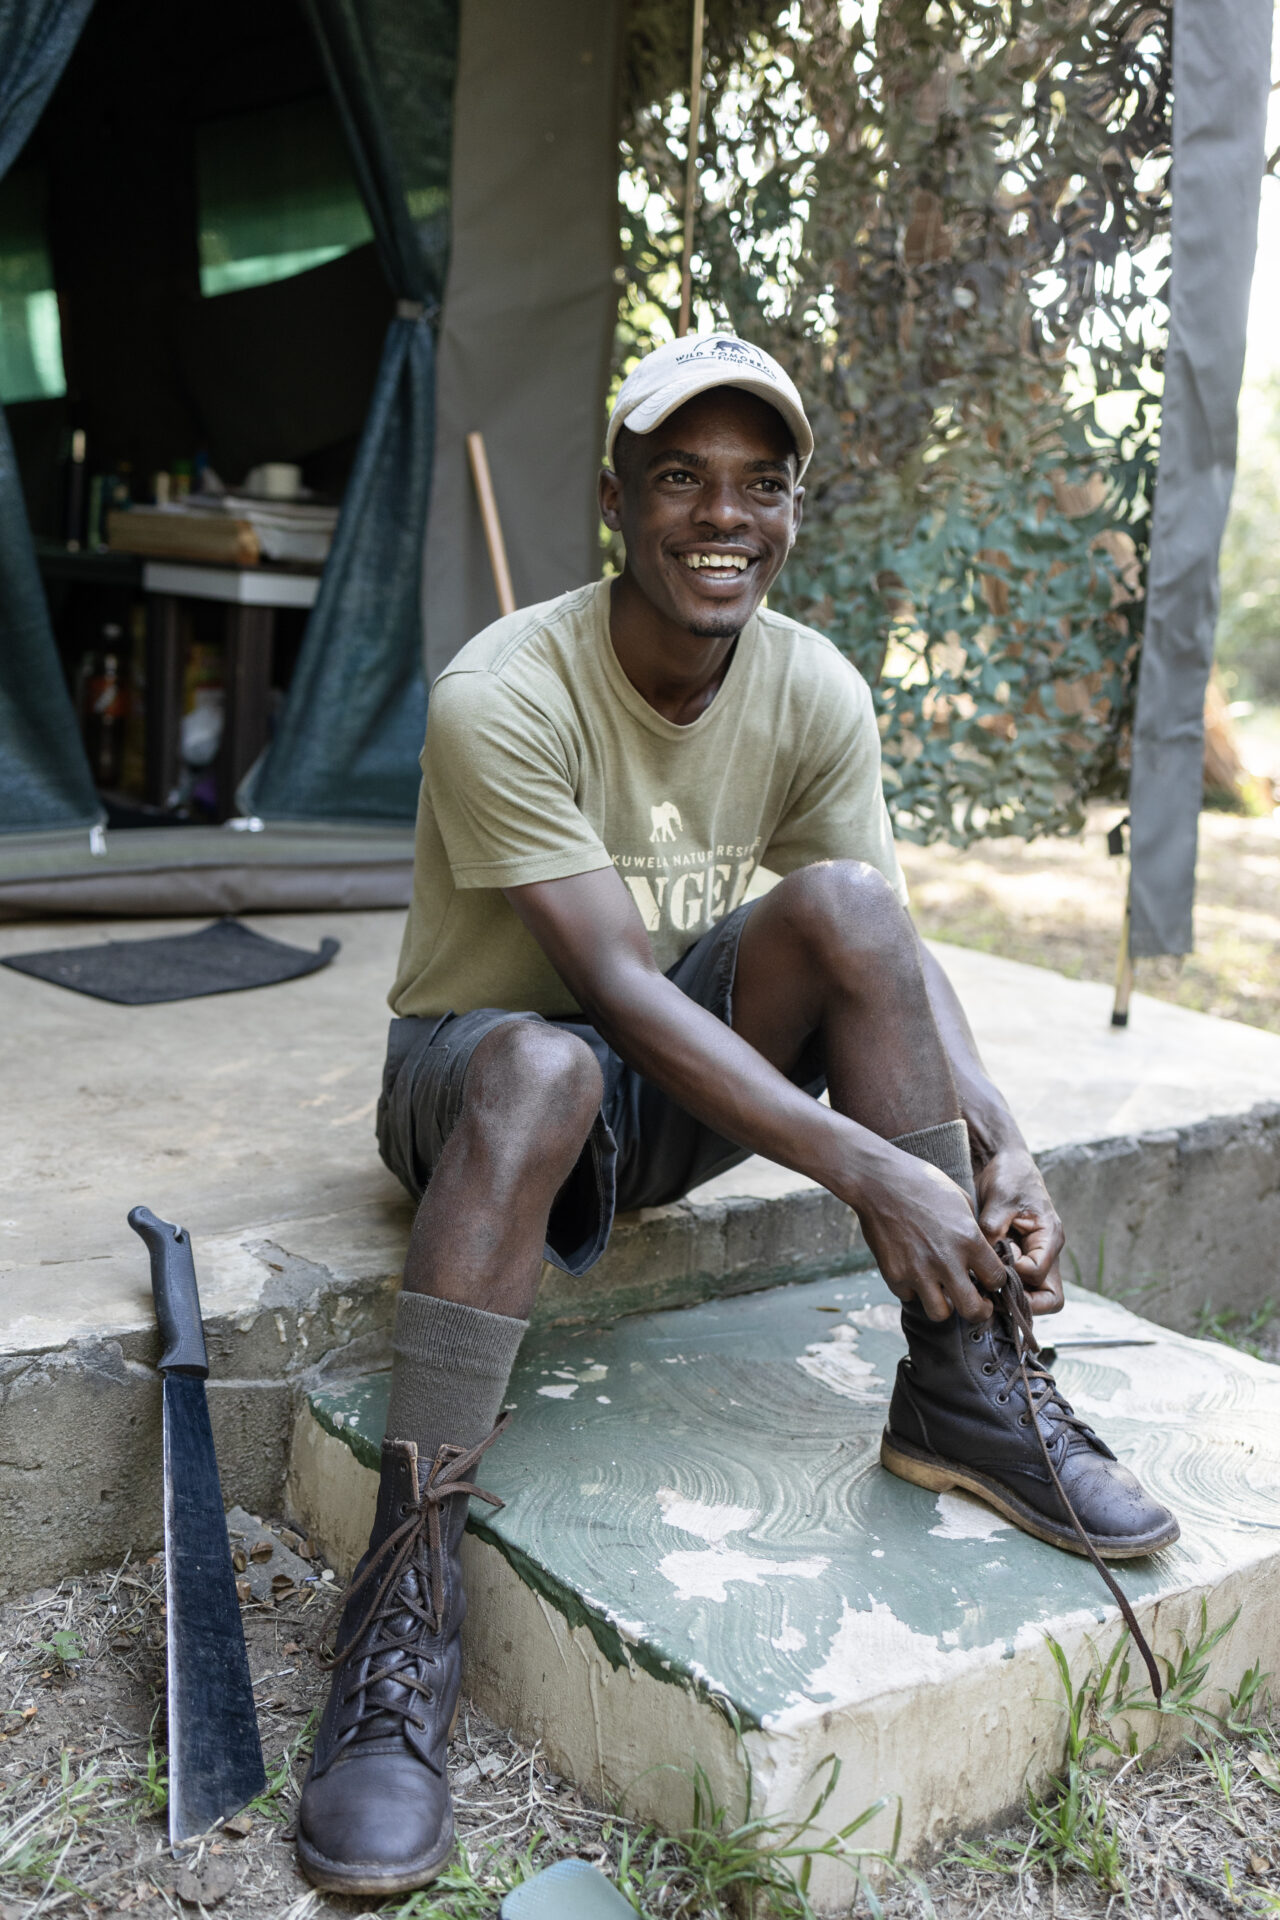 Ranger Zamani sits on the steps of the ranger hut to tie his boot laces